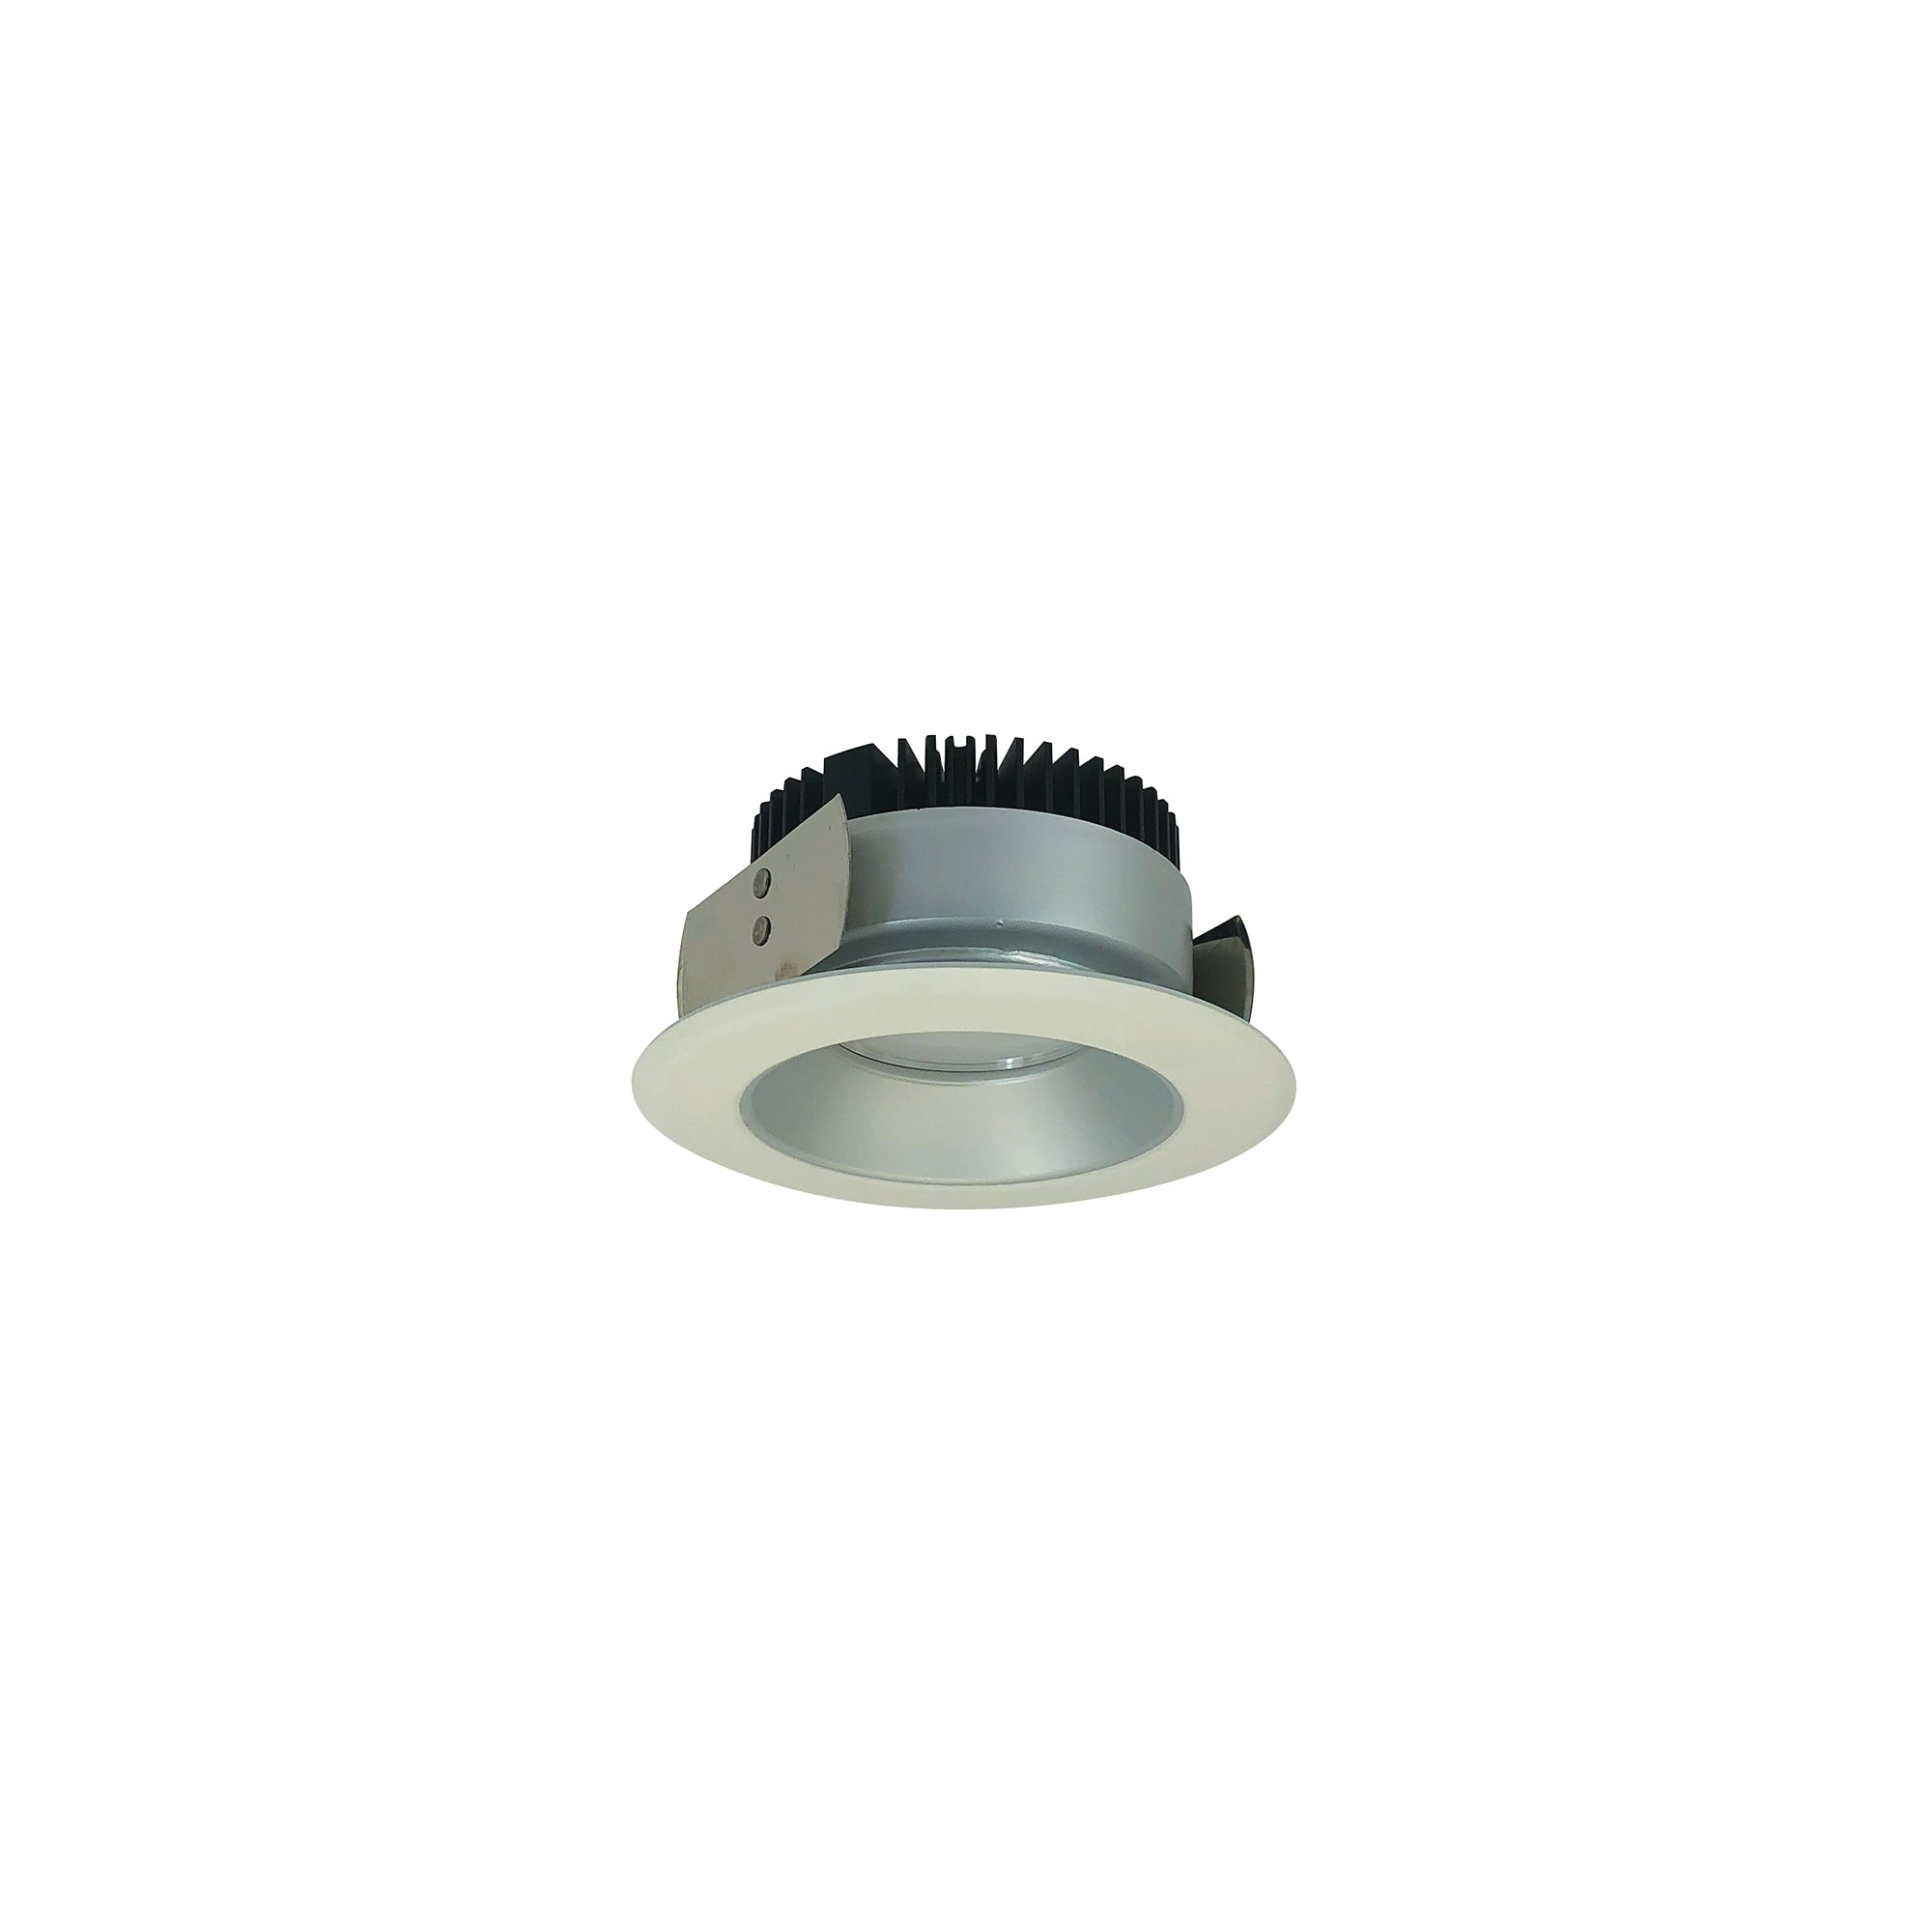 Nora Lighting NRM2-411L0927FHZW - Recessed - 4 Inch Marquise II Round Reflector, 900lm, 2700K, Flood, Haze/White